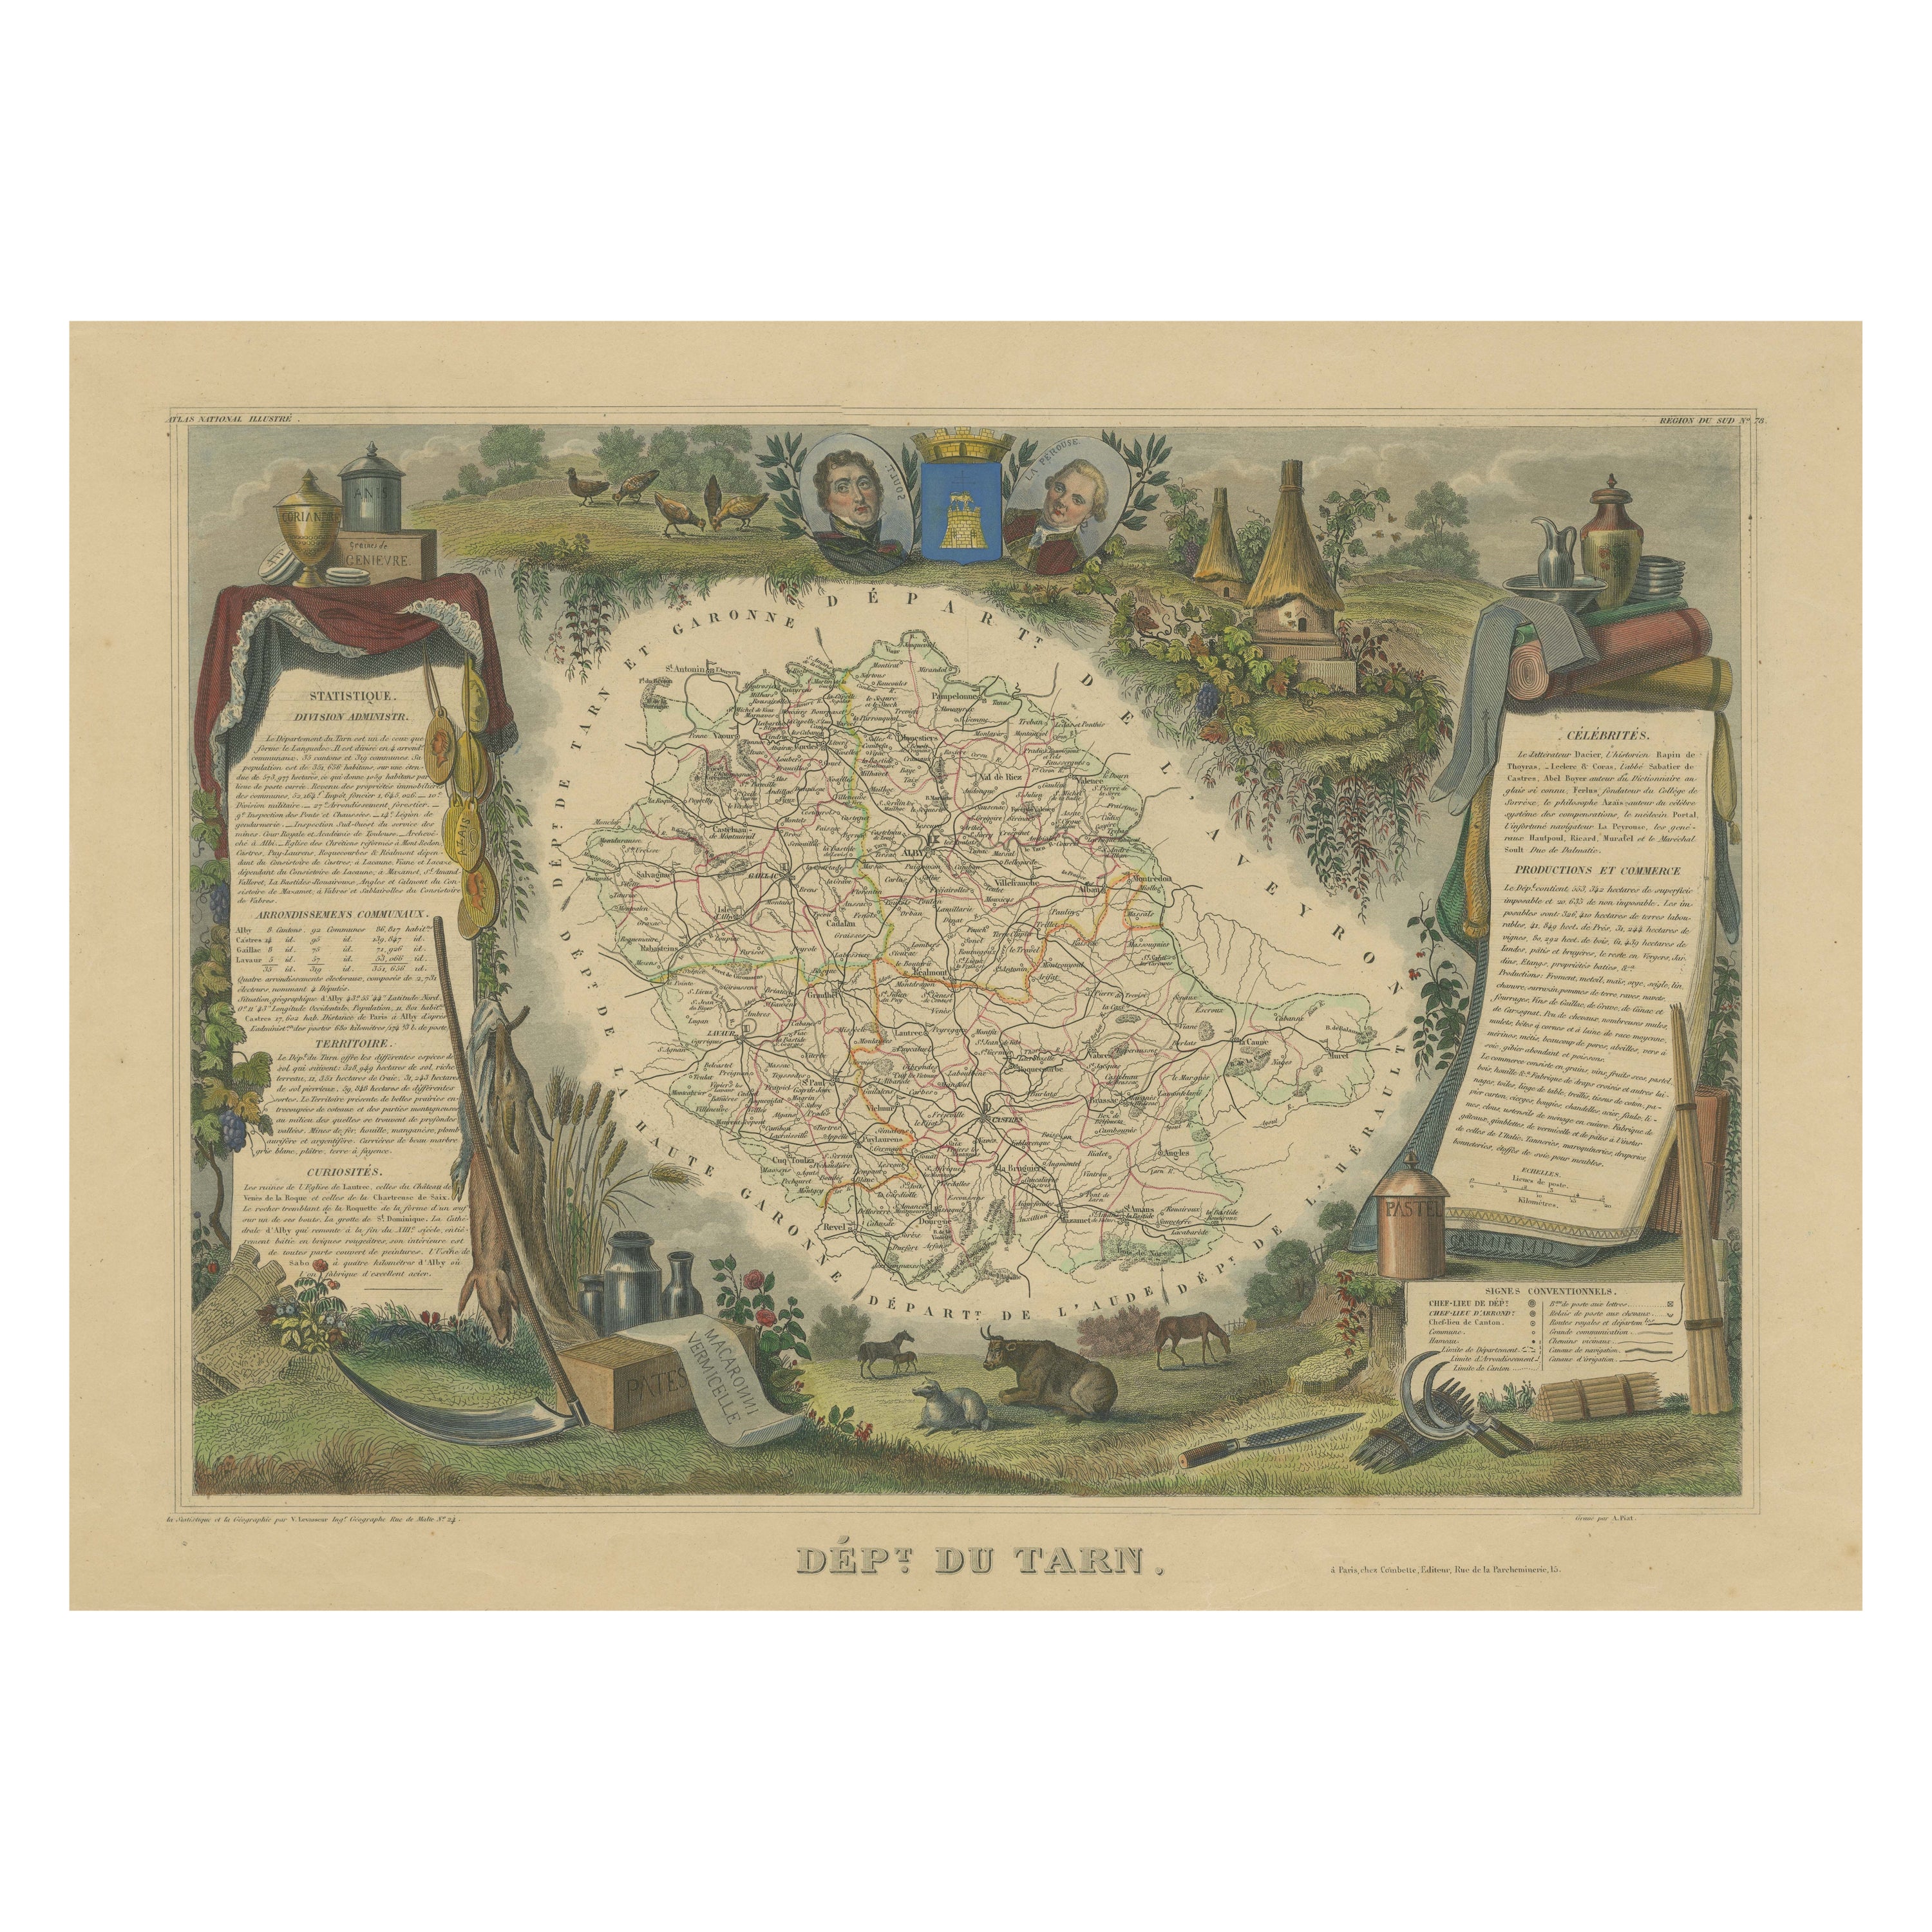 Hand Colored Antique Map of the Department of Tarn, France, circa 1852